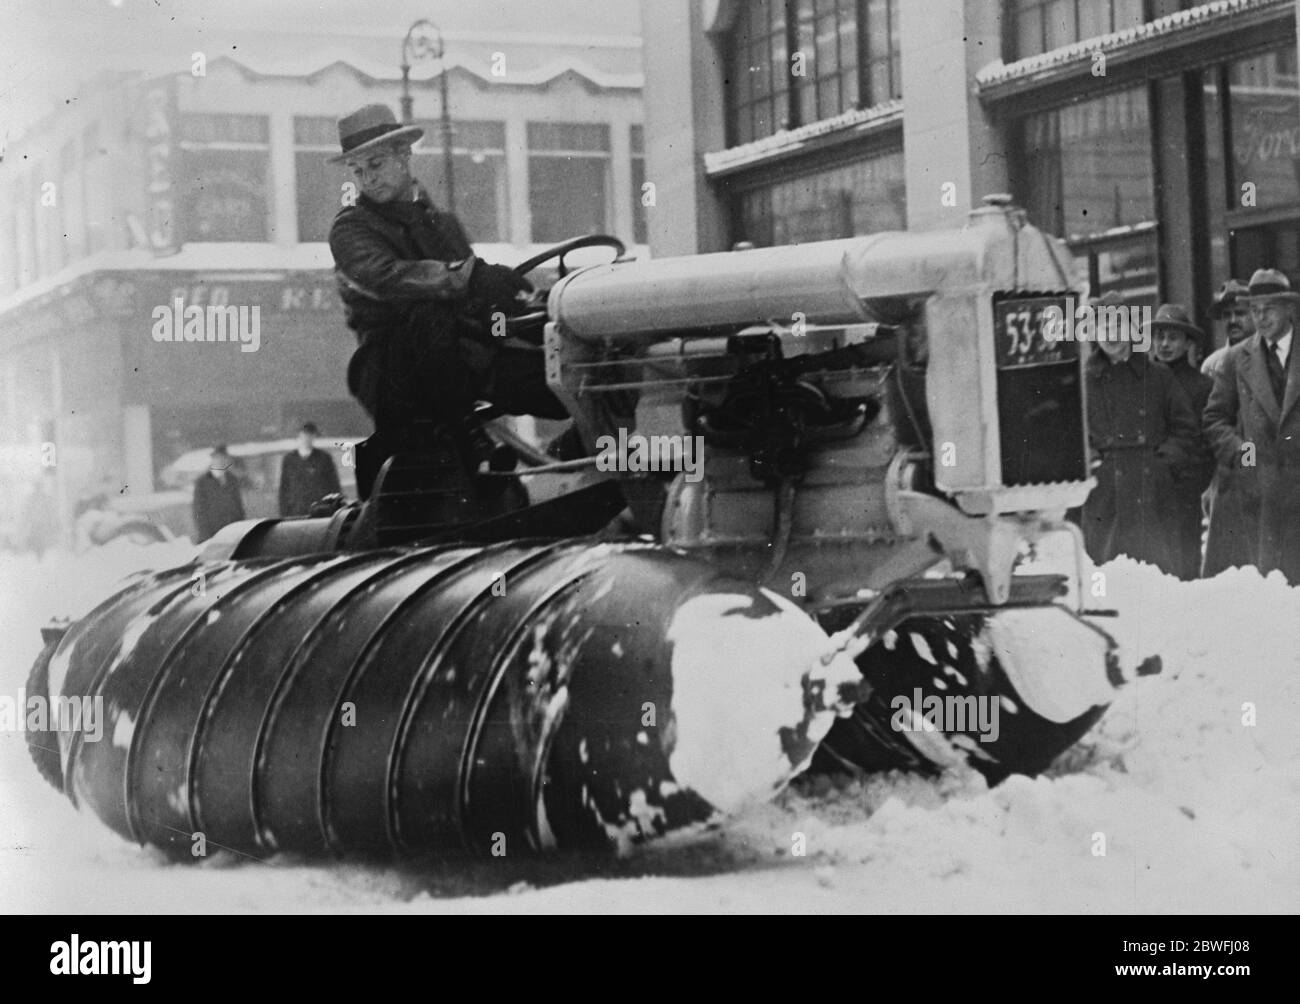 Snow motors in New York Snow motors seen at work in the streets of New York after a severe snowstorm 13 February 1926 Stock Photo